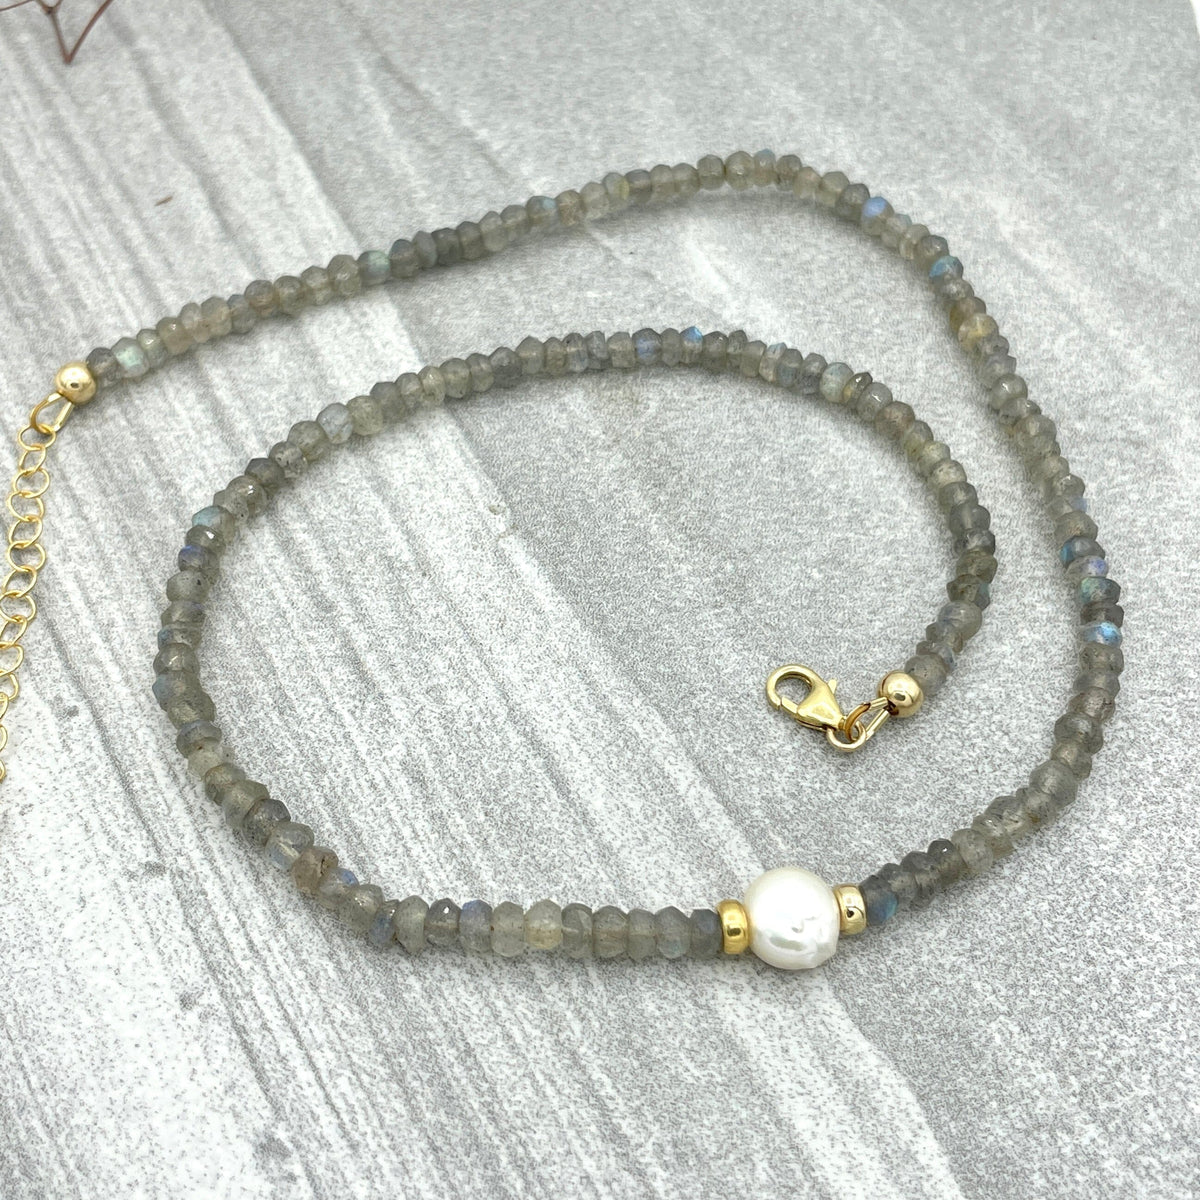 Strung Together Labradorite and Pearl Beaded Necklace - 14k gold filled | Little Rock Collection necklace Amanda K Lockrow